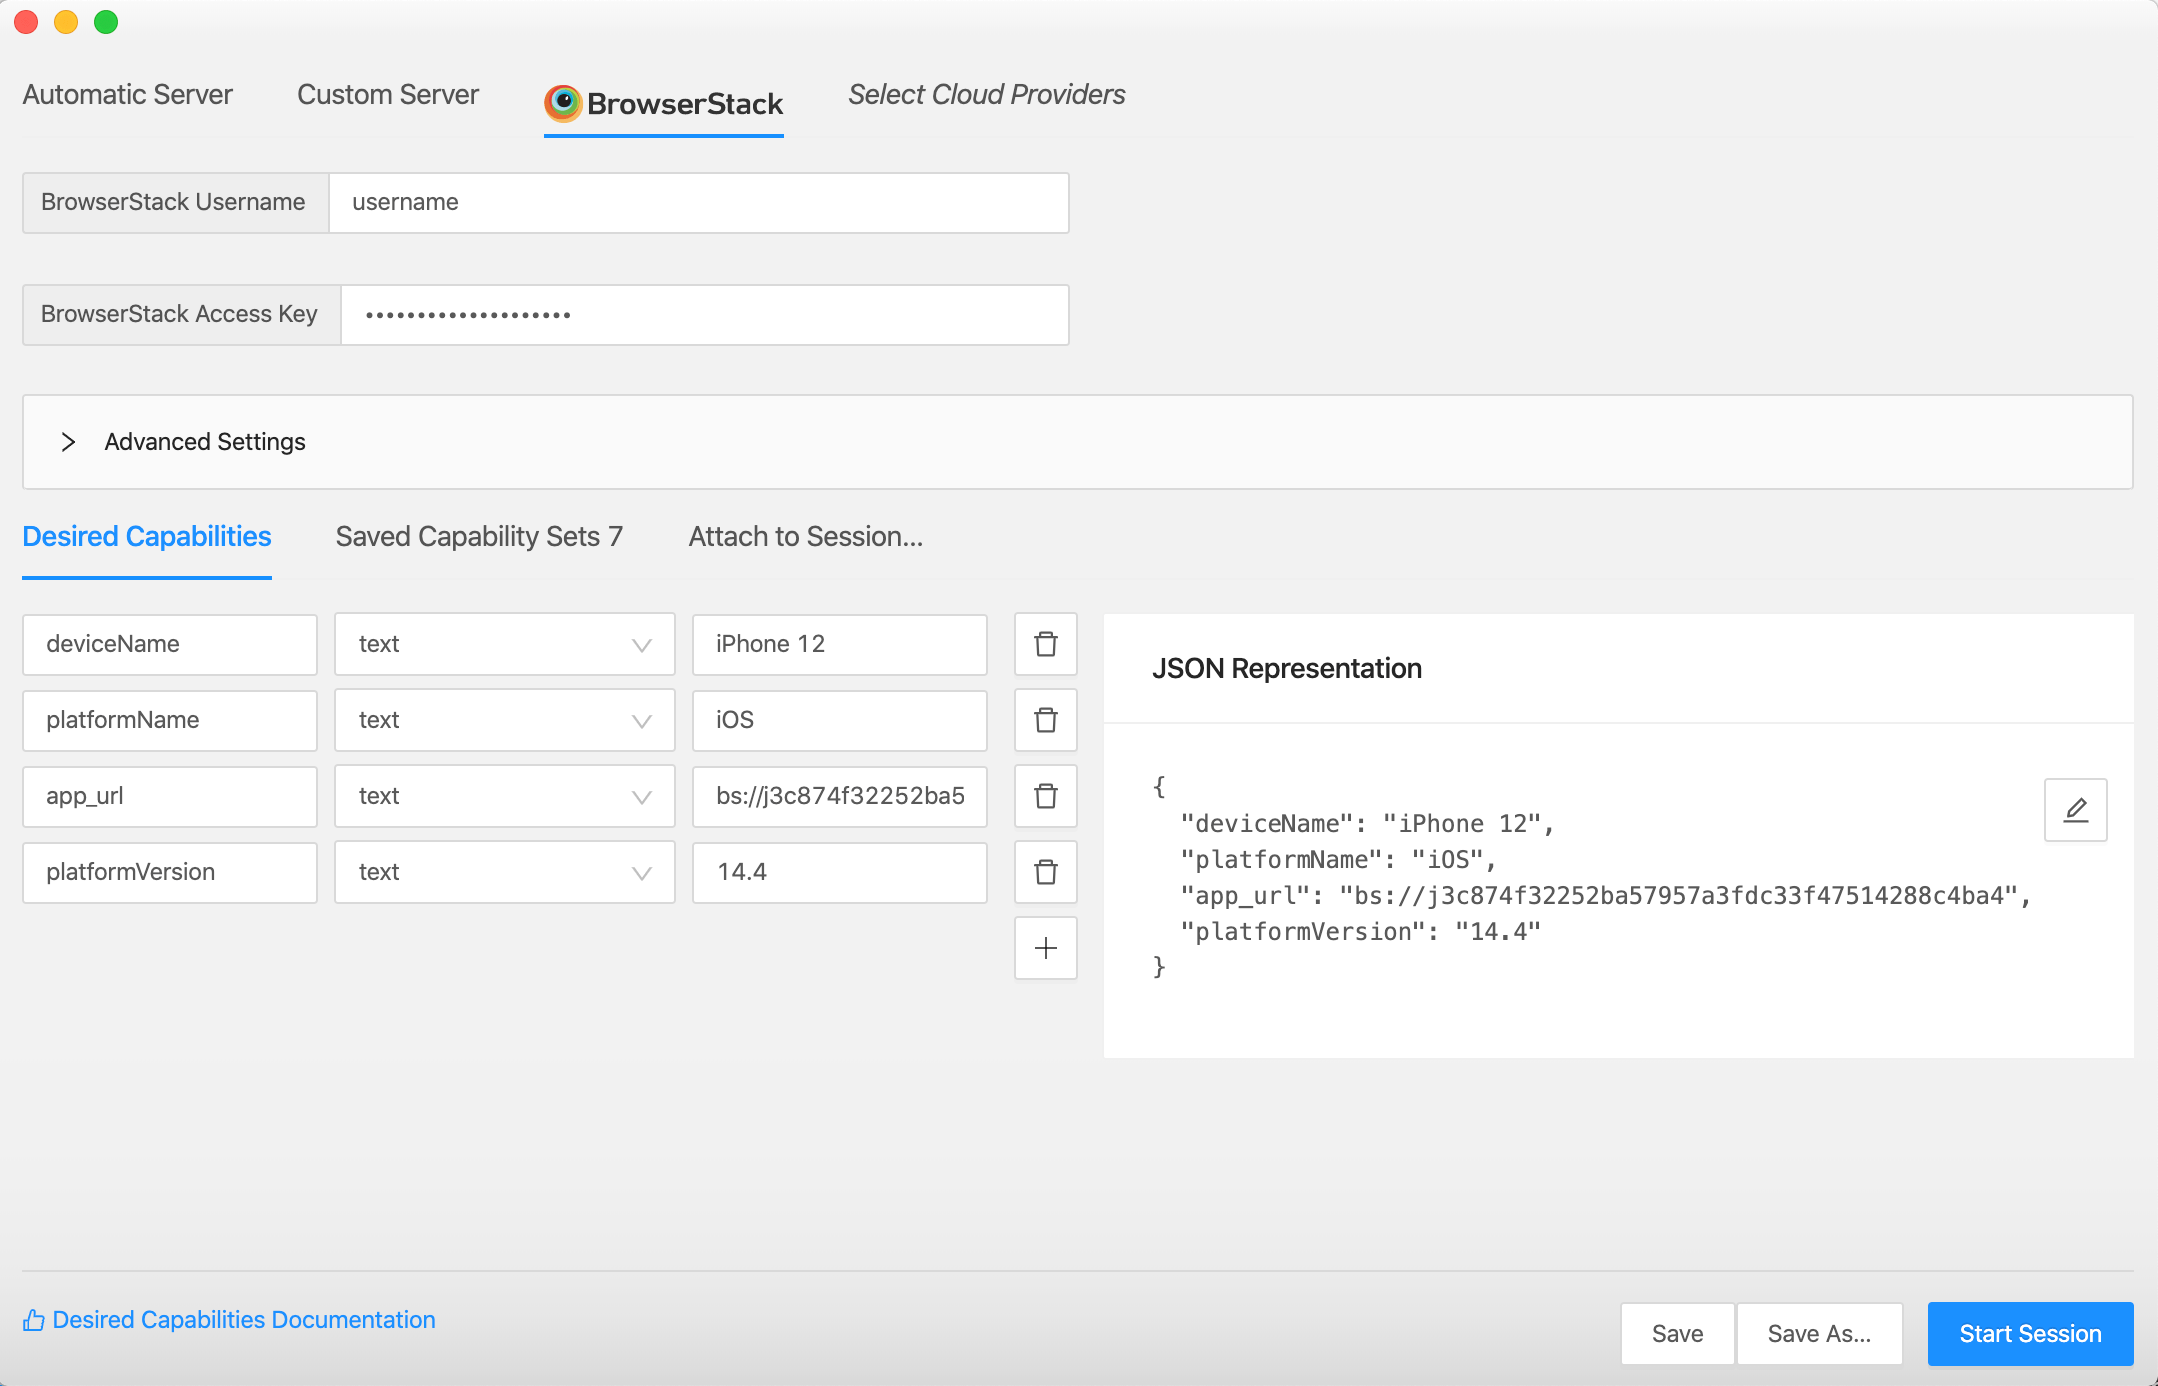 Configure BrowserStack capabilities in the Desired Capabilities tab on Appium Desktop. Use the app_url value obtained in step 1 to set the app capability value